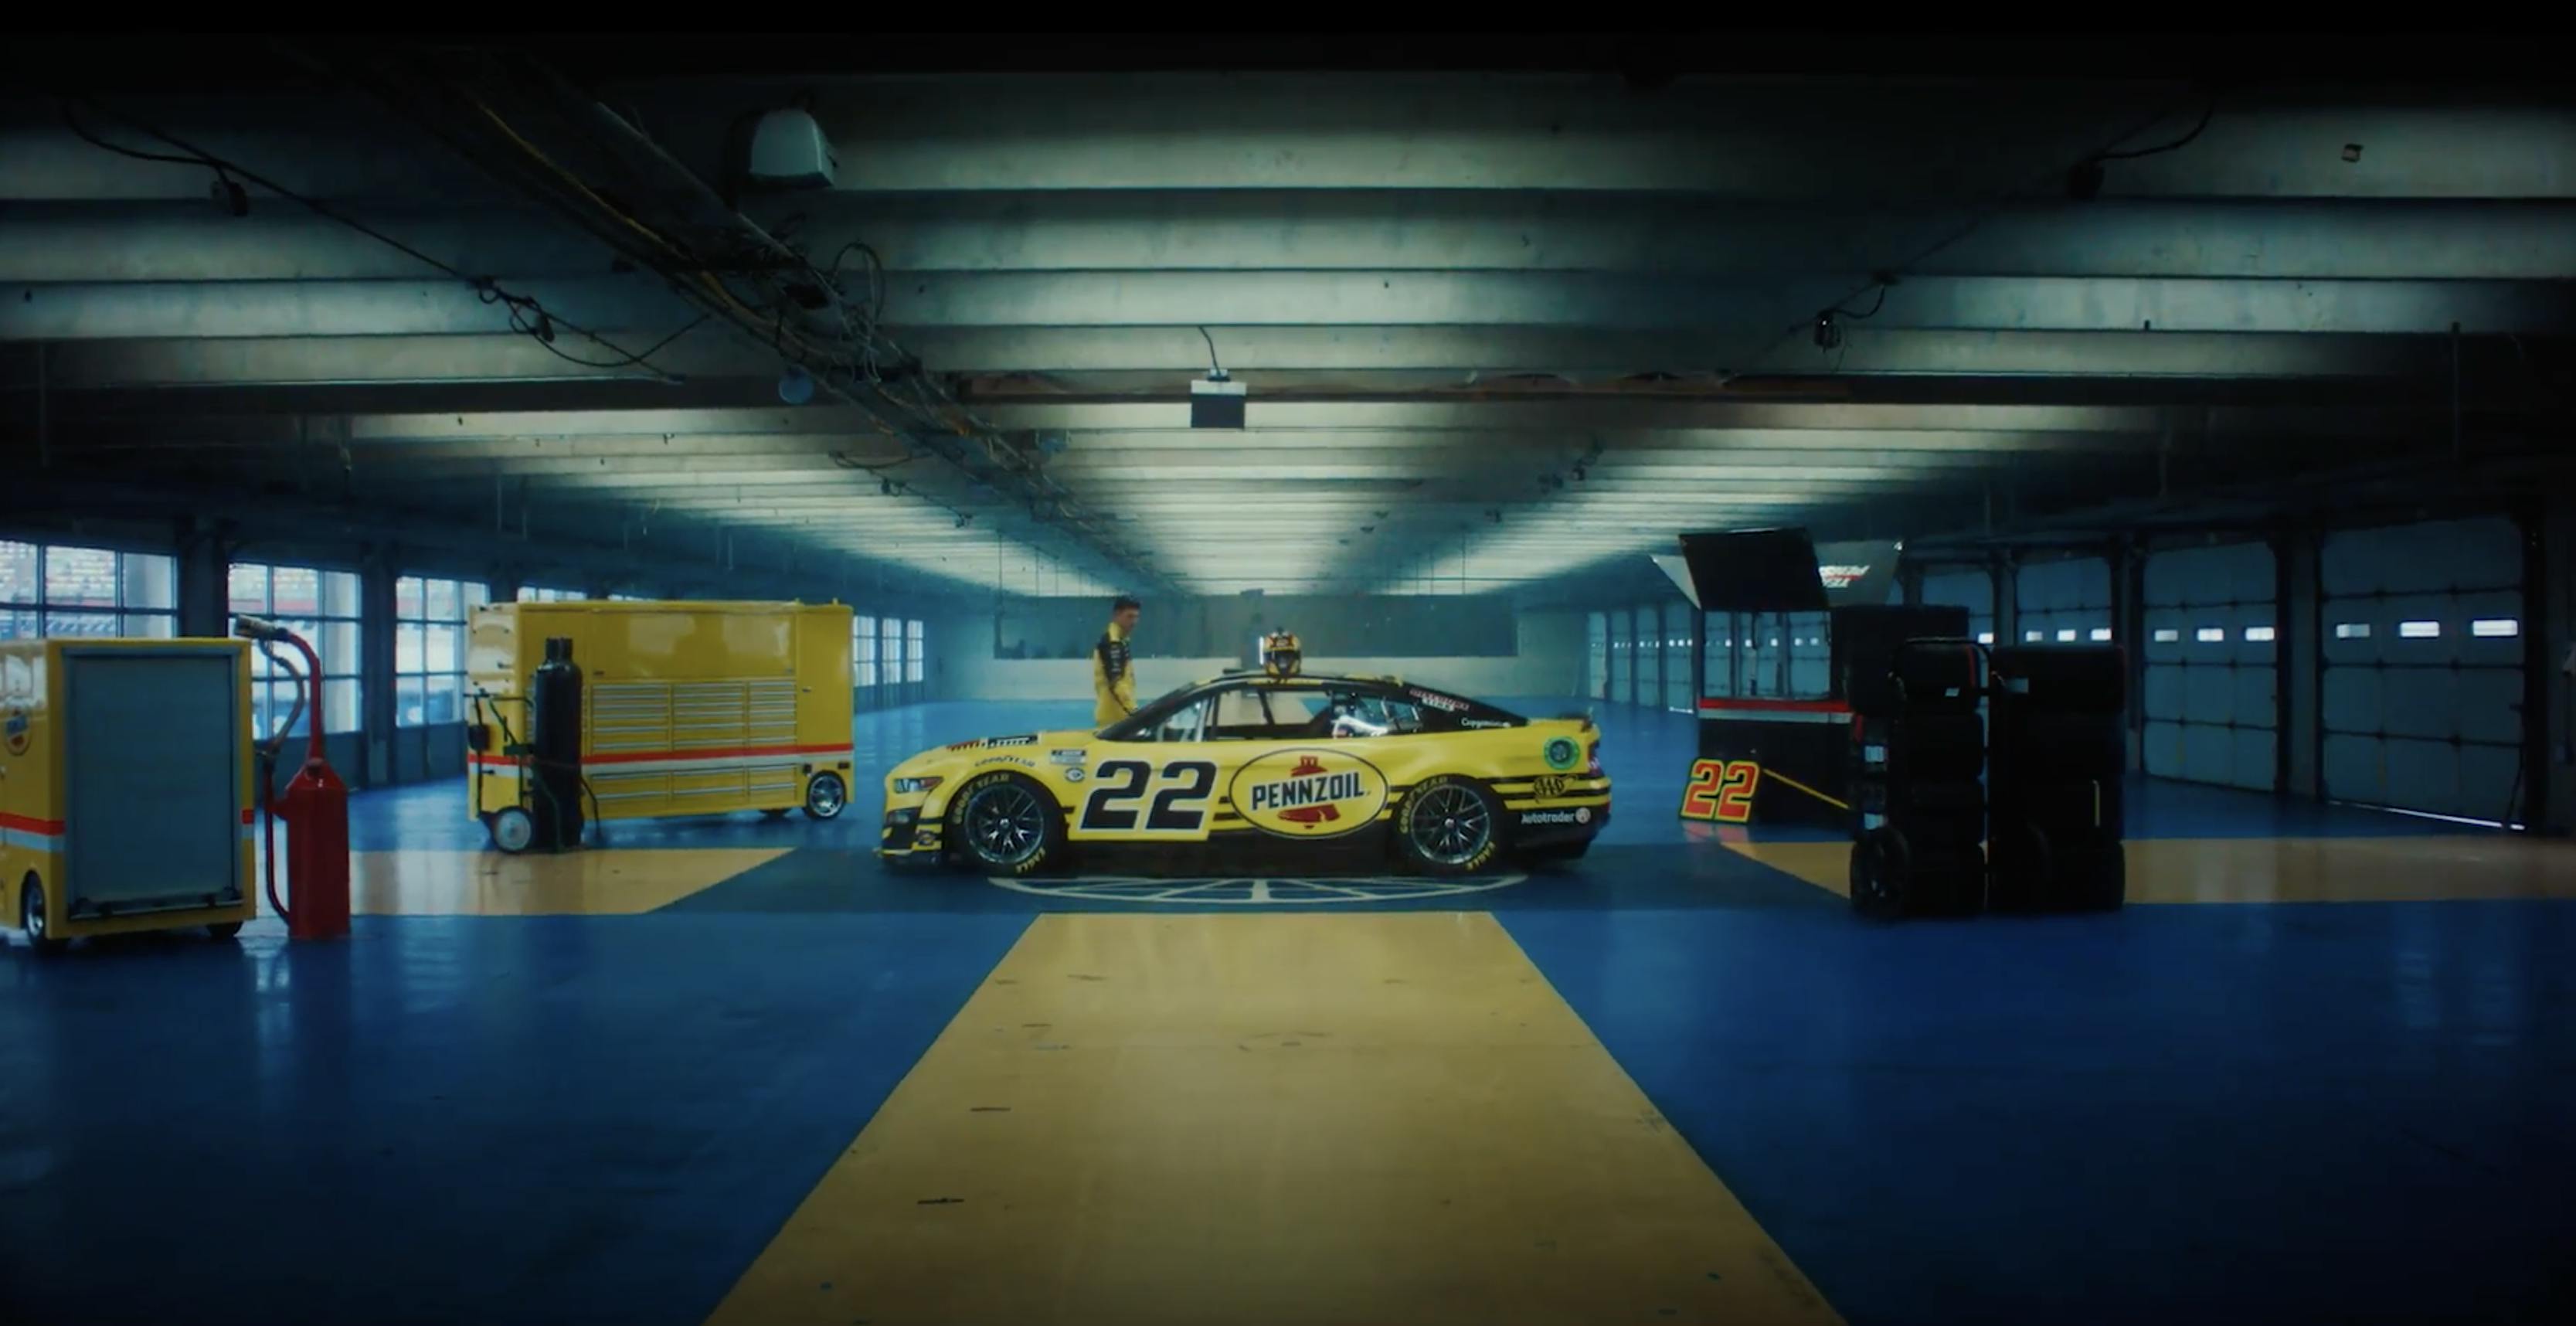 A yellow racecar with the Pennzoil logo sits in a large blue and yellow room